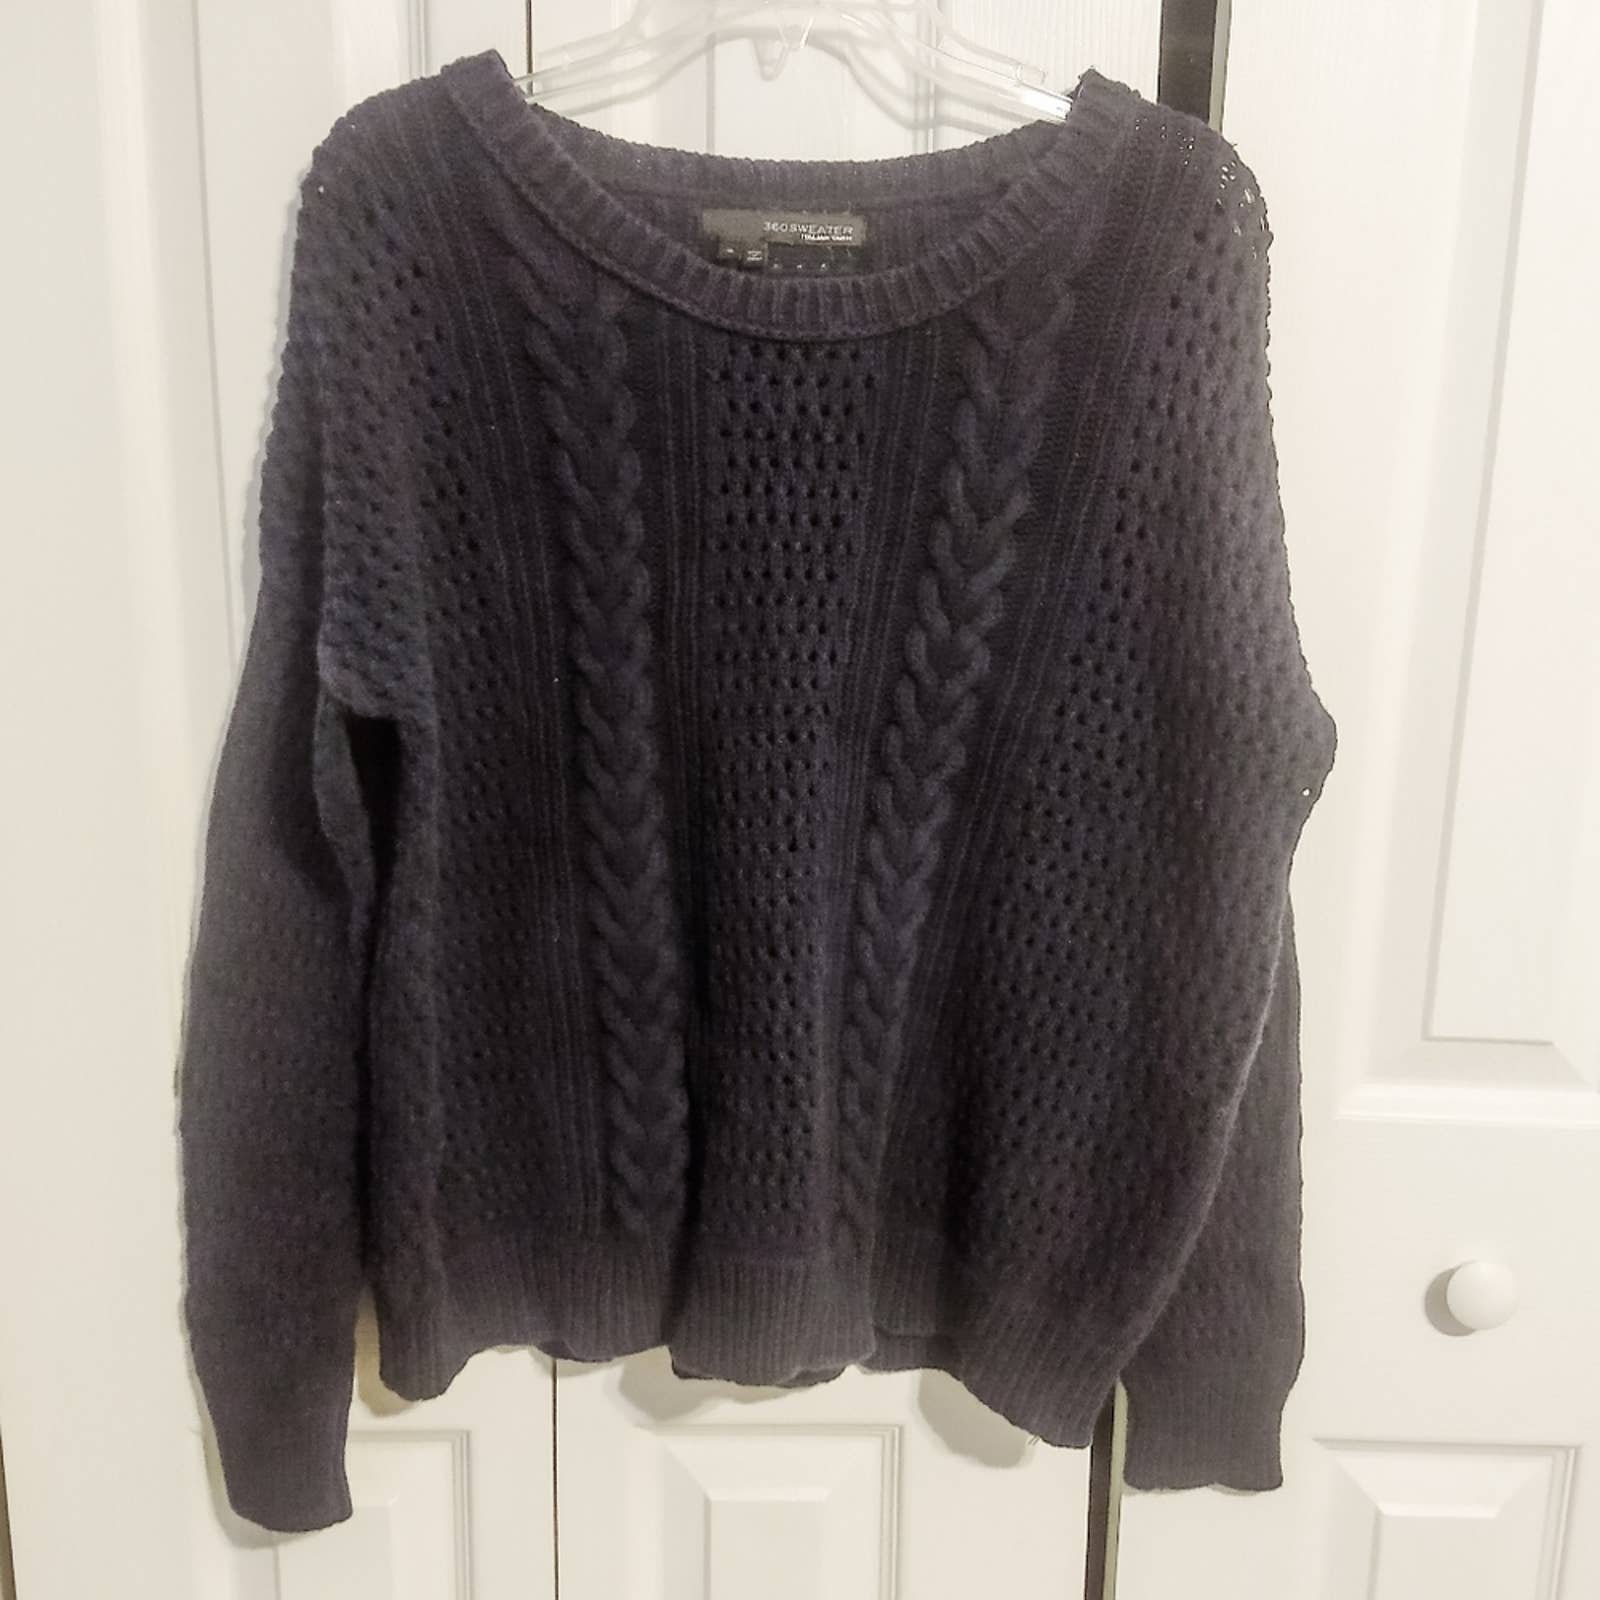 High quality 360 Sweater Cable Knit Crewneck 100% Cotto